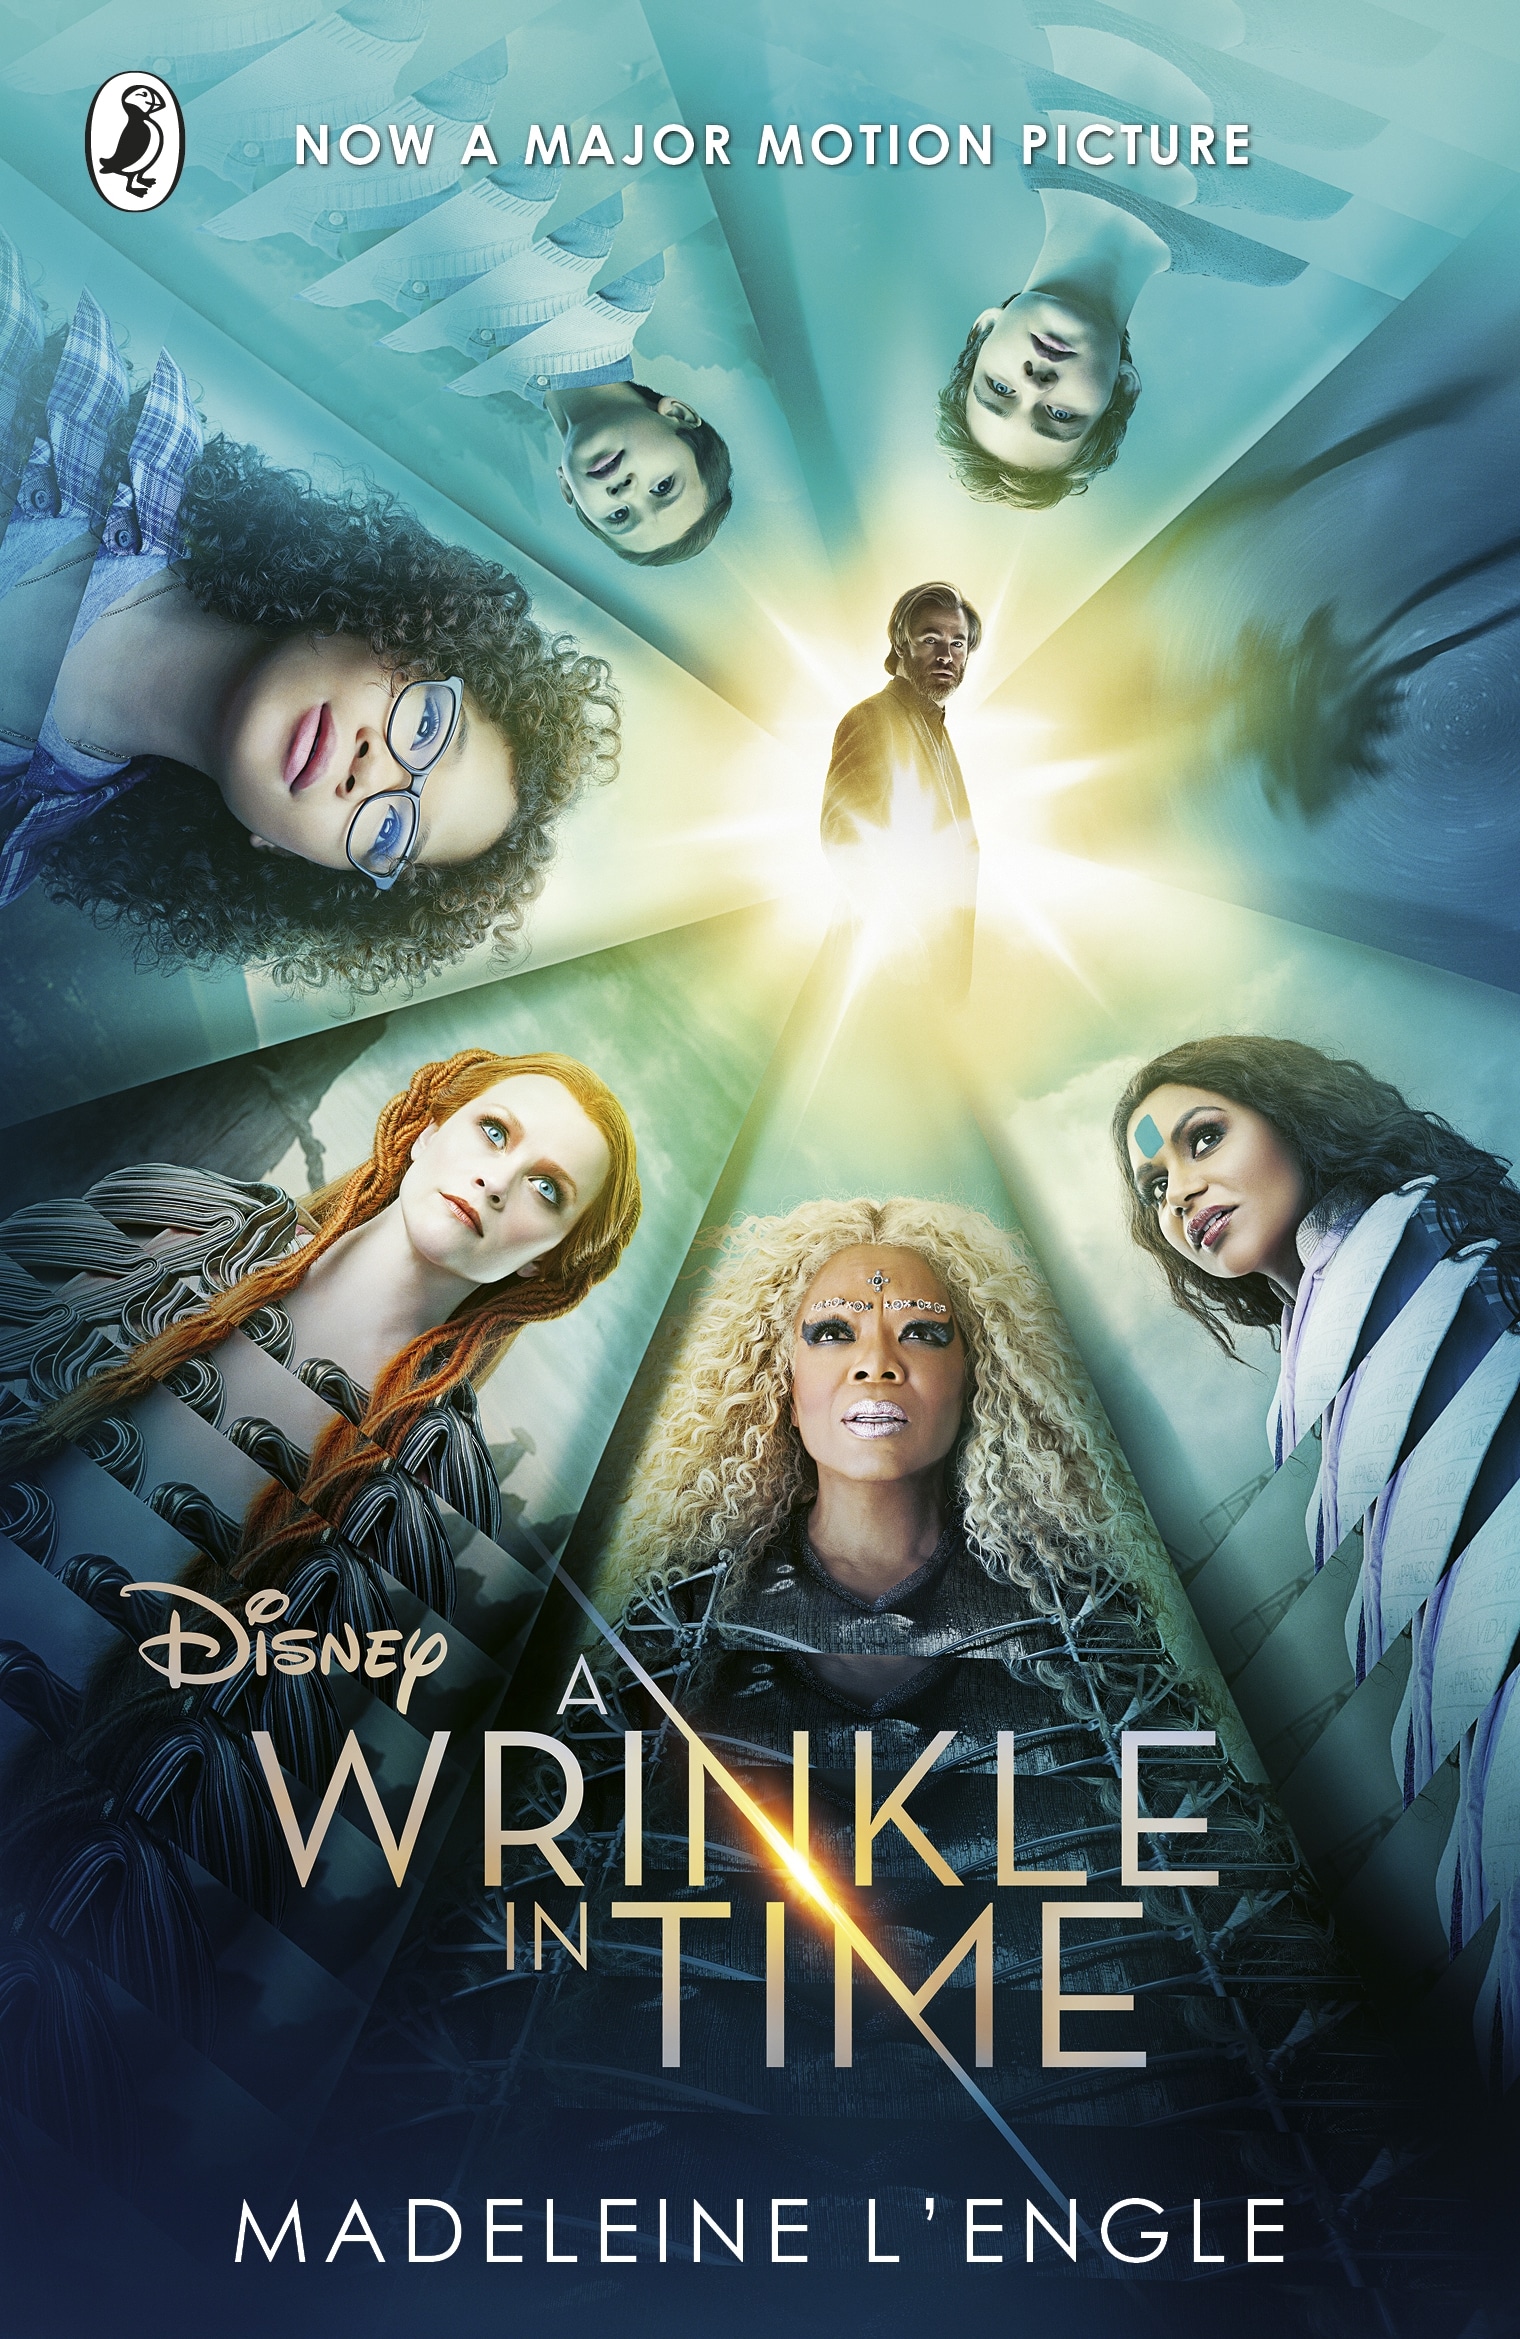 Book “A Wrinkle in Time” by Madeleine L'Engle — January 30, 2018